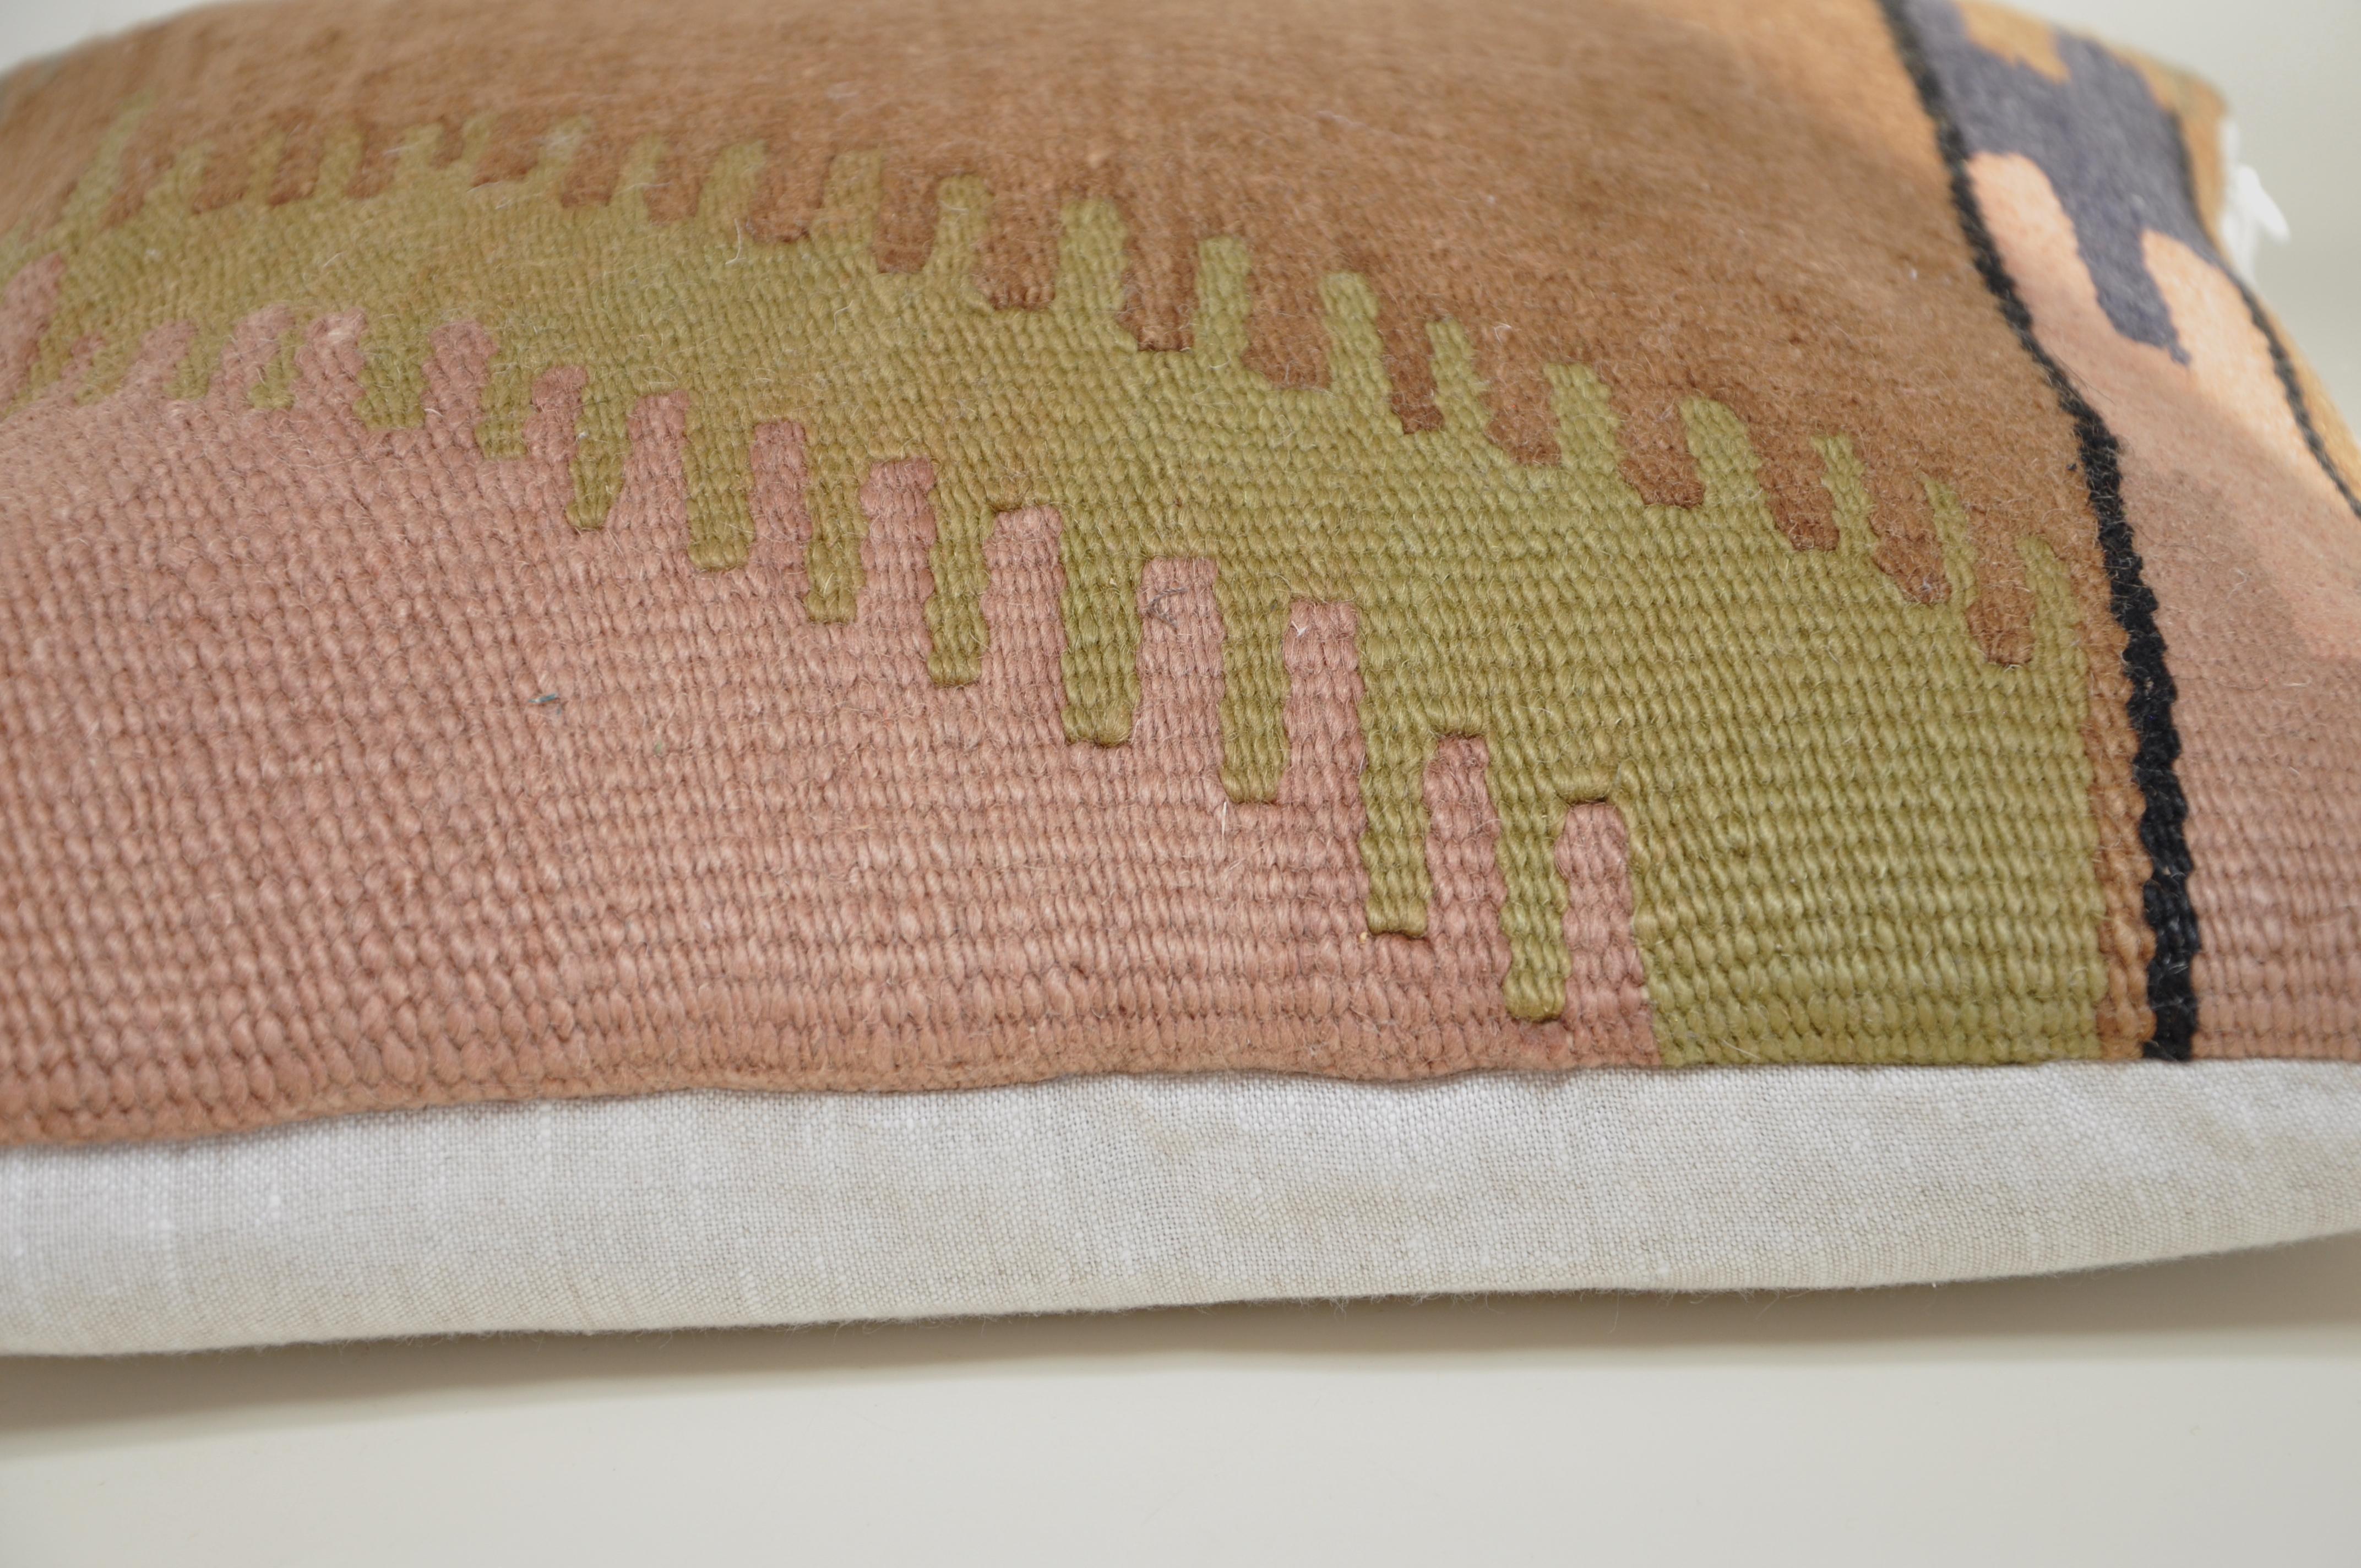 Northern Irish Vintage Kilim Rug Pillow with Irish Linen by Katie Larmour Cushions Pink Blue For Sale